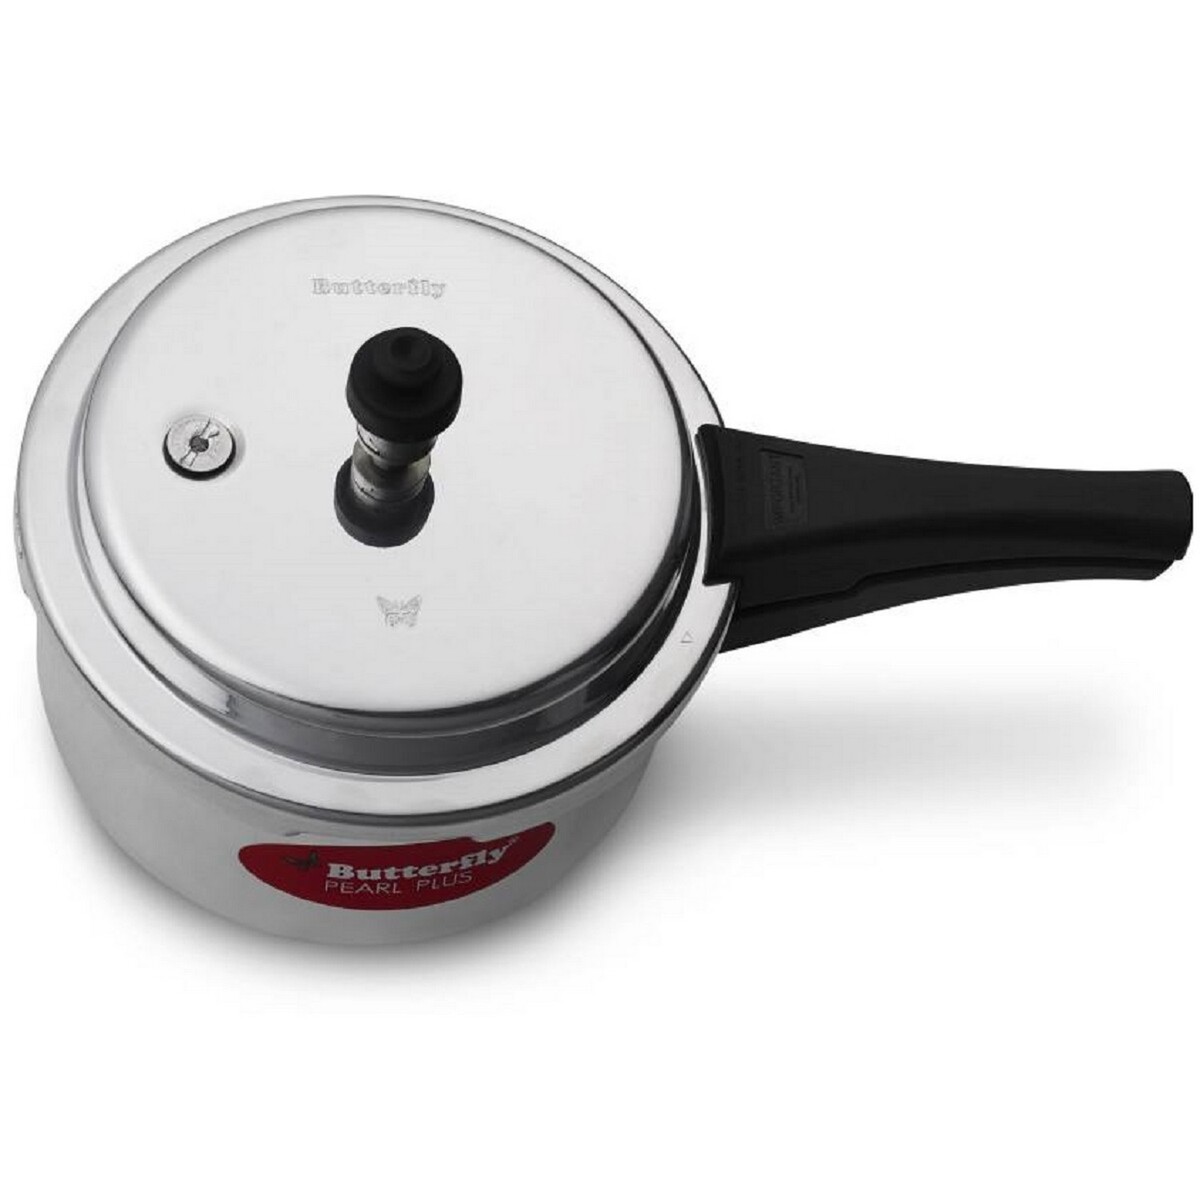 Butterfly Pressure Cooker Pearl Plus OLC 3Ltr